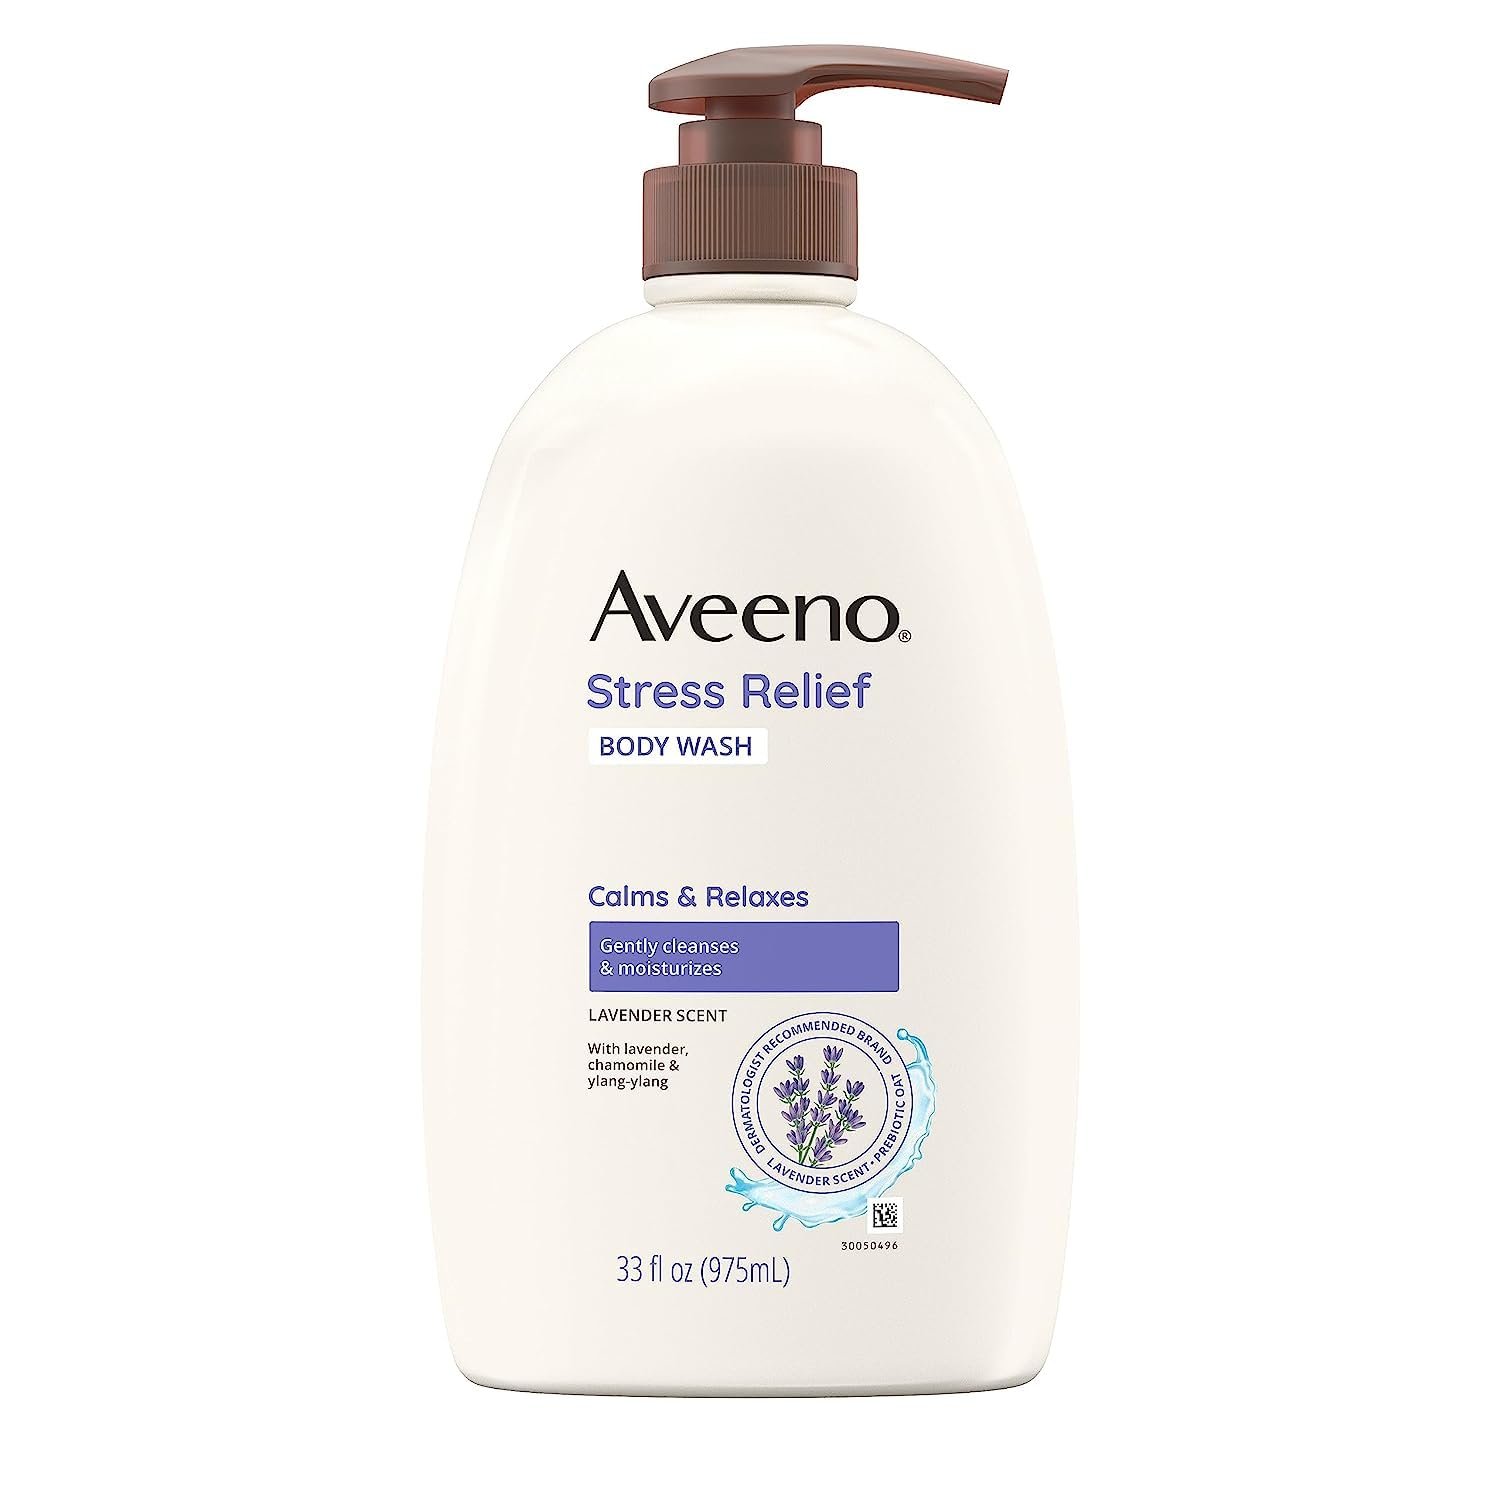 Aveeno Stress Relief Body Wash with Soothing Oat  Lavender Scent for Sensitive Skin, Moisturizing Shower Wash Gently Cleanses  Helps You Feel Calm  Relaxed, Sulfate-Free, 33 fl. oz